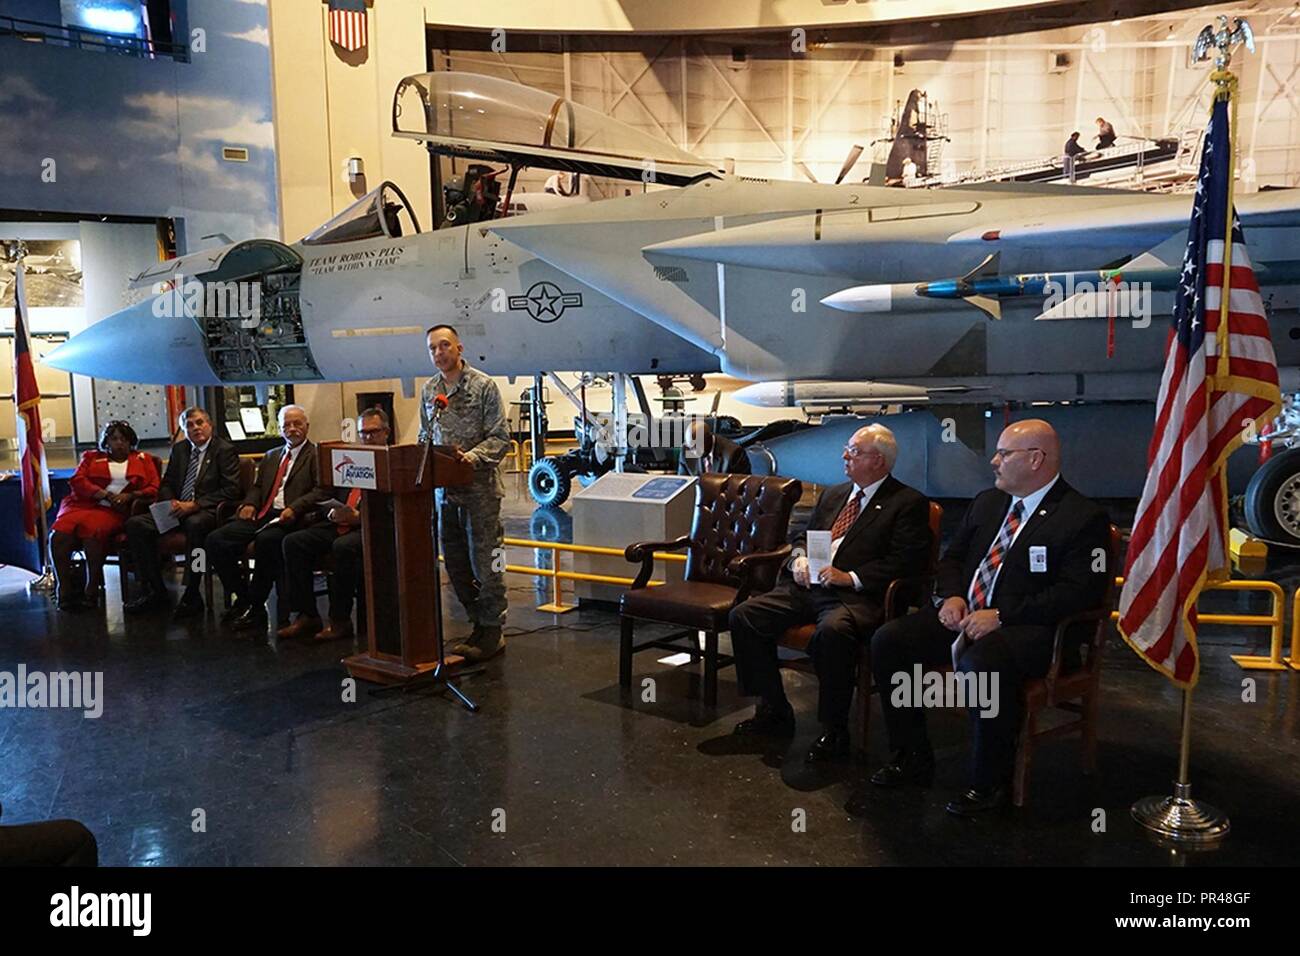 Col. Lyle Drew, Robins Air Force Base Installation Commander, and Middle Georgia community members gathered at the Museum of Aviation to honor military and first responders during the Patriot Day ceremony, Sept. 11, 2018. Drew, the mayors of the City of Perry, City of Centerville and City of Warner Robins spoke at the event which also included a moment of silence and A Litany of Remembrance reading. Stock Photo